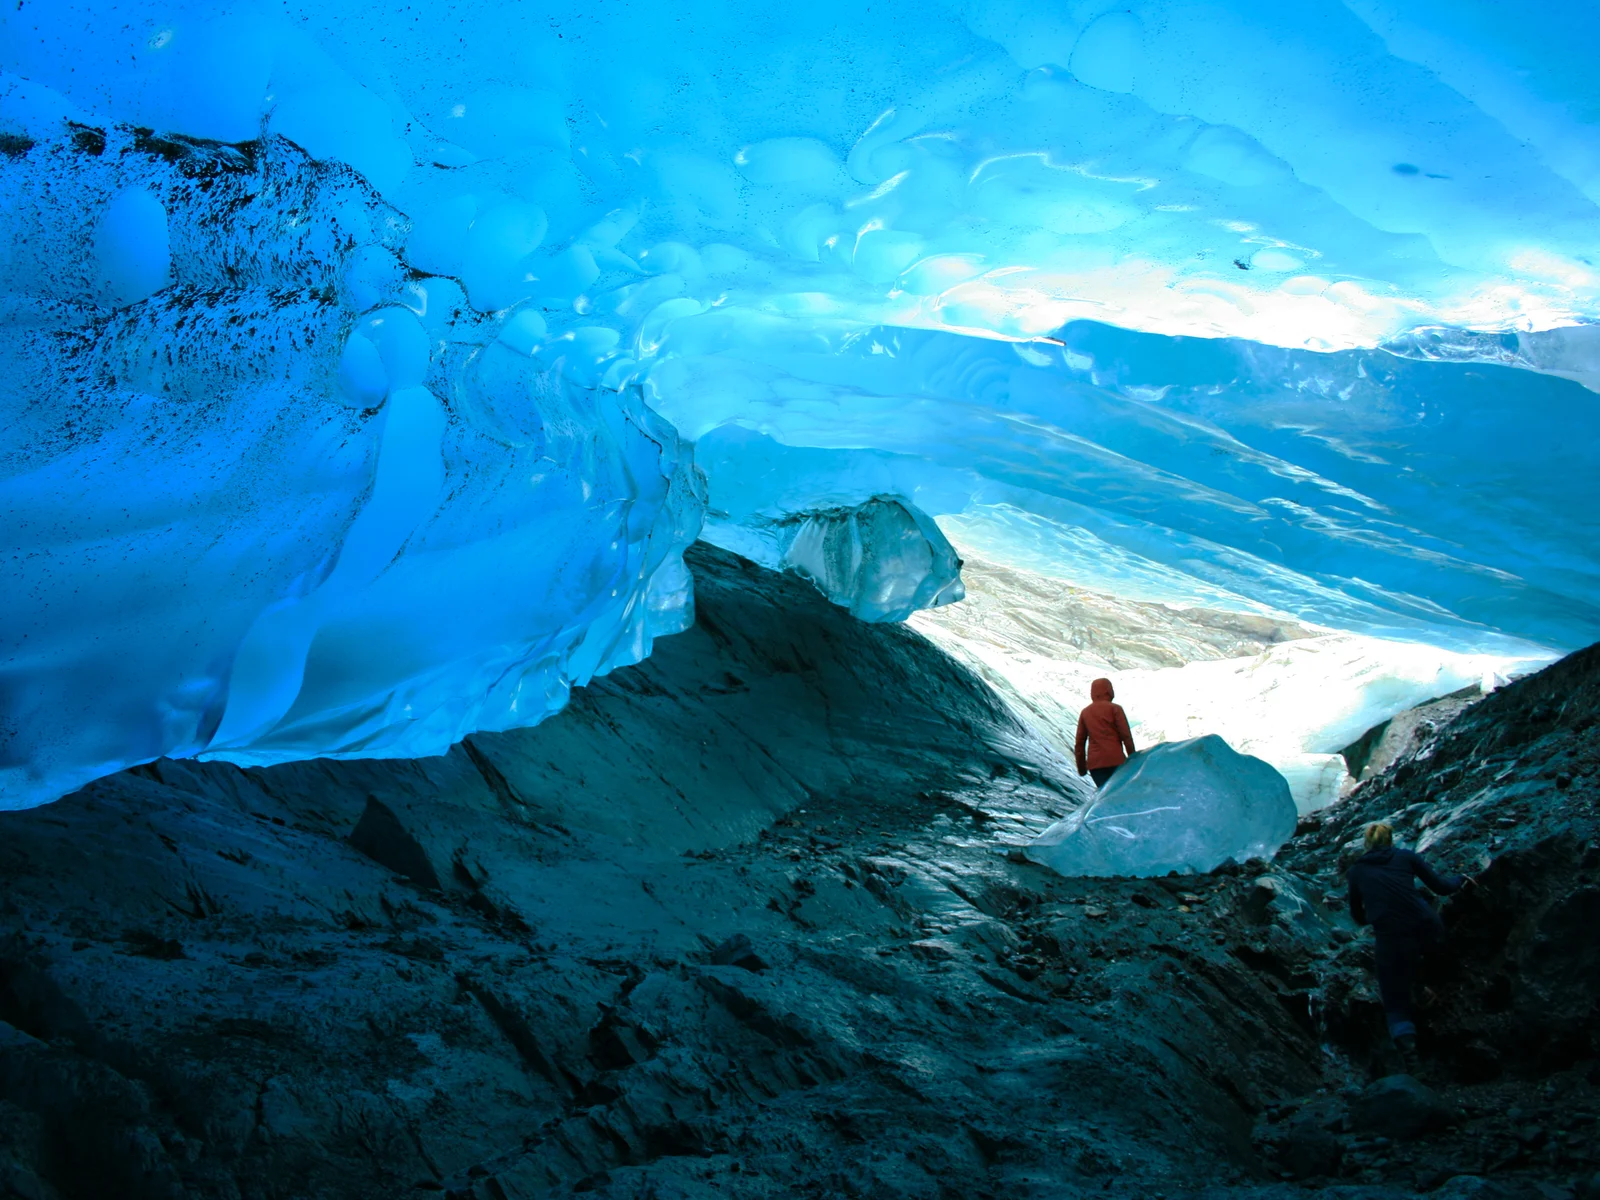 A woman exploring the chilly Mendenhall Ice Caves in Alaska, one of the most beautiful places in the US